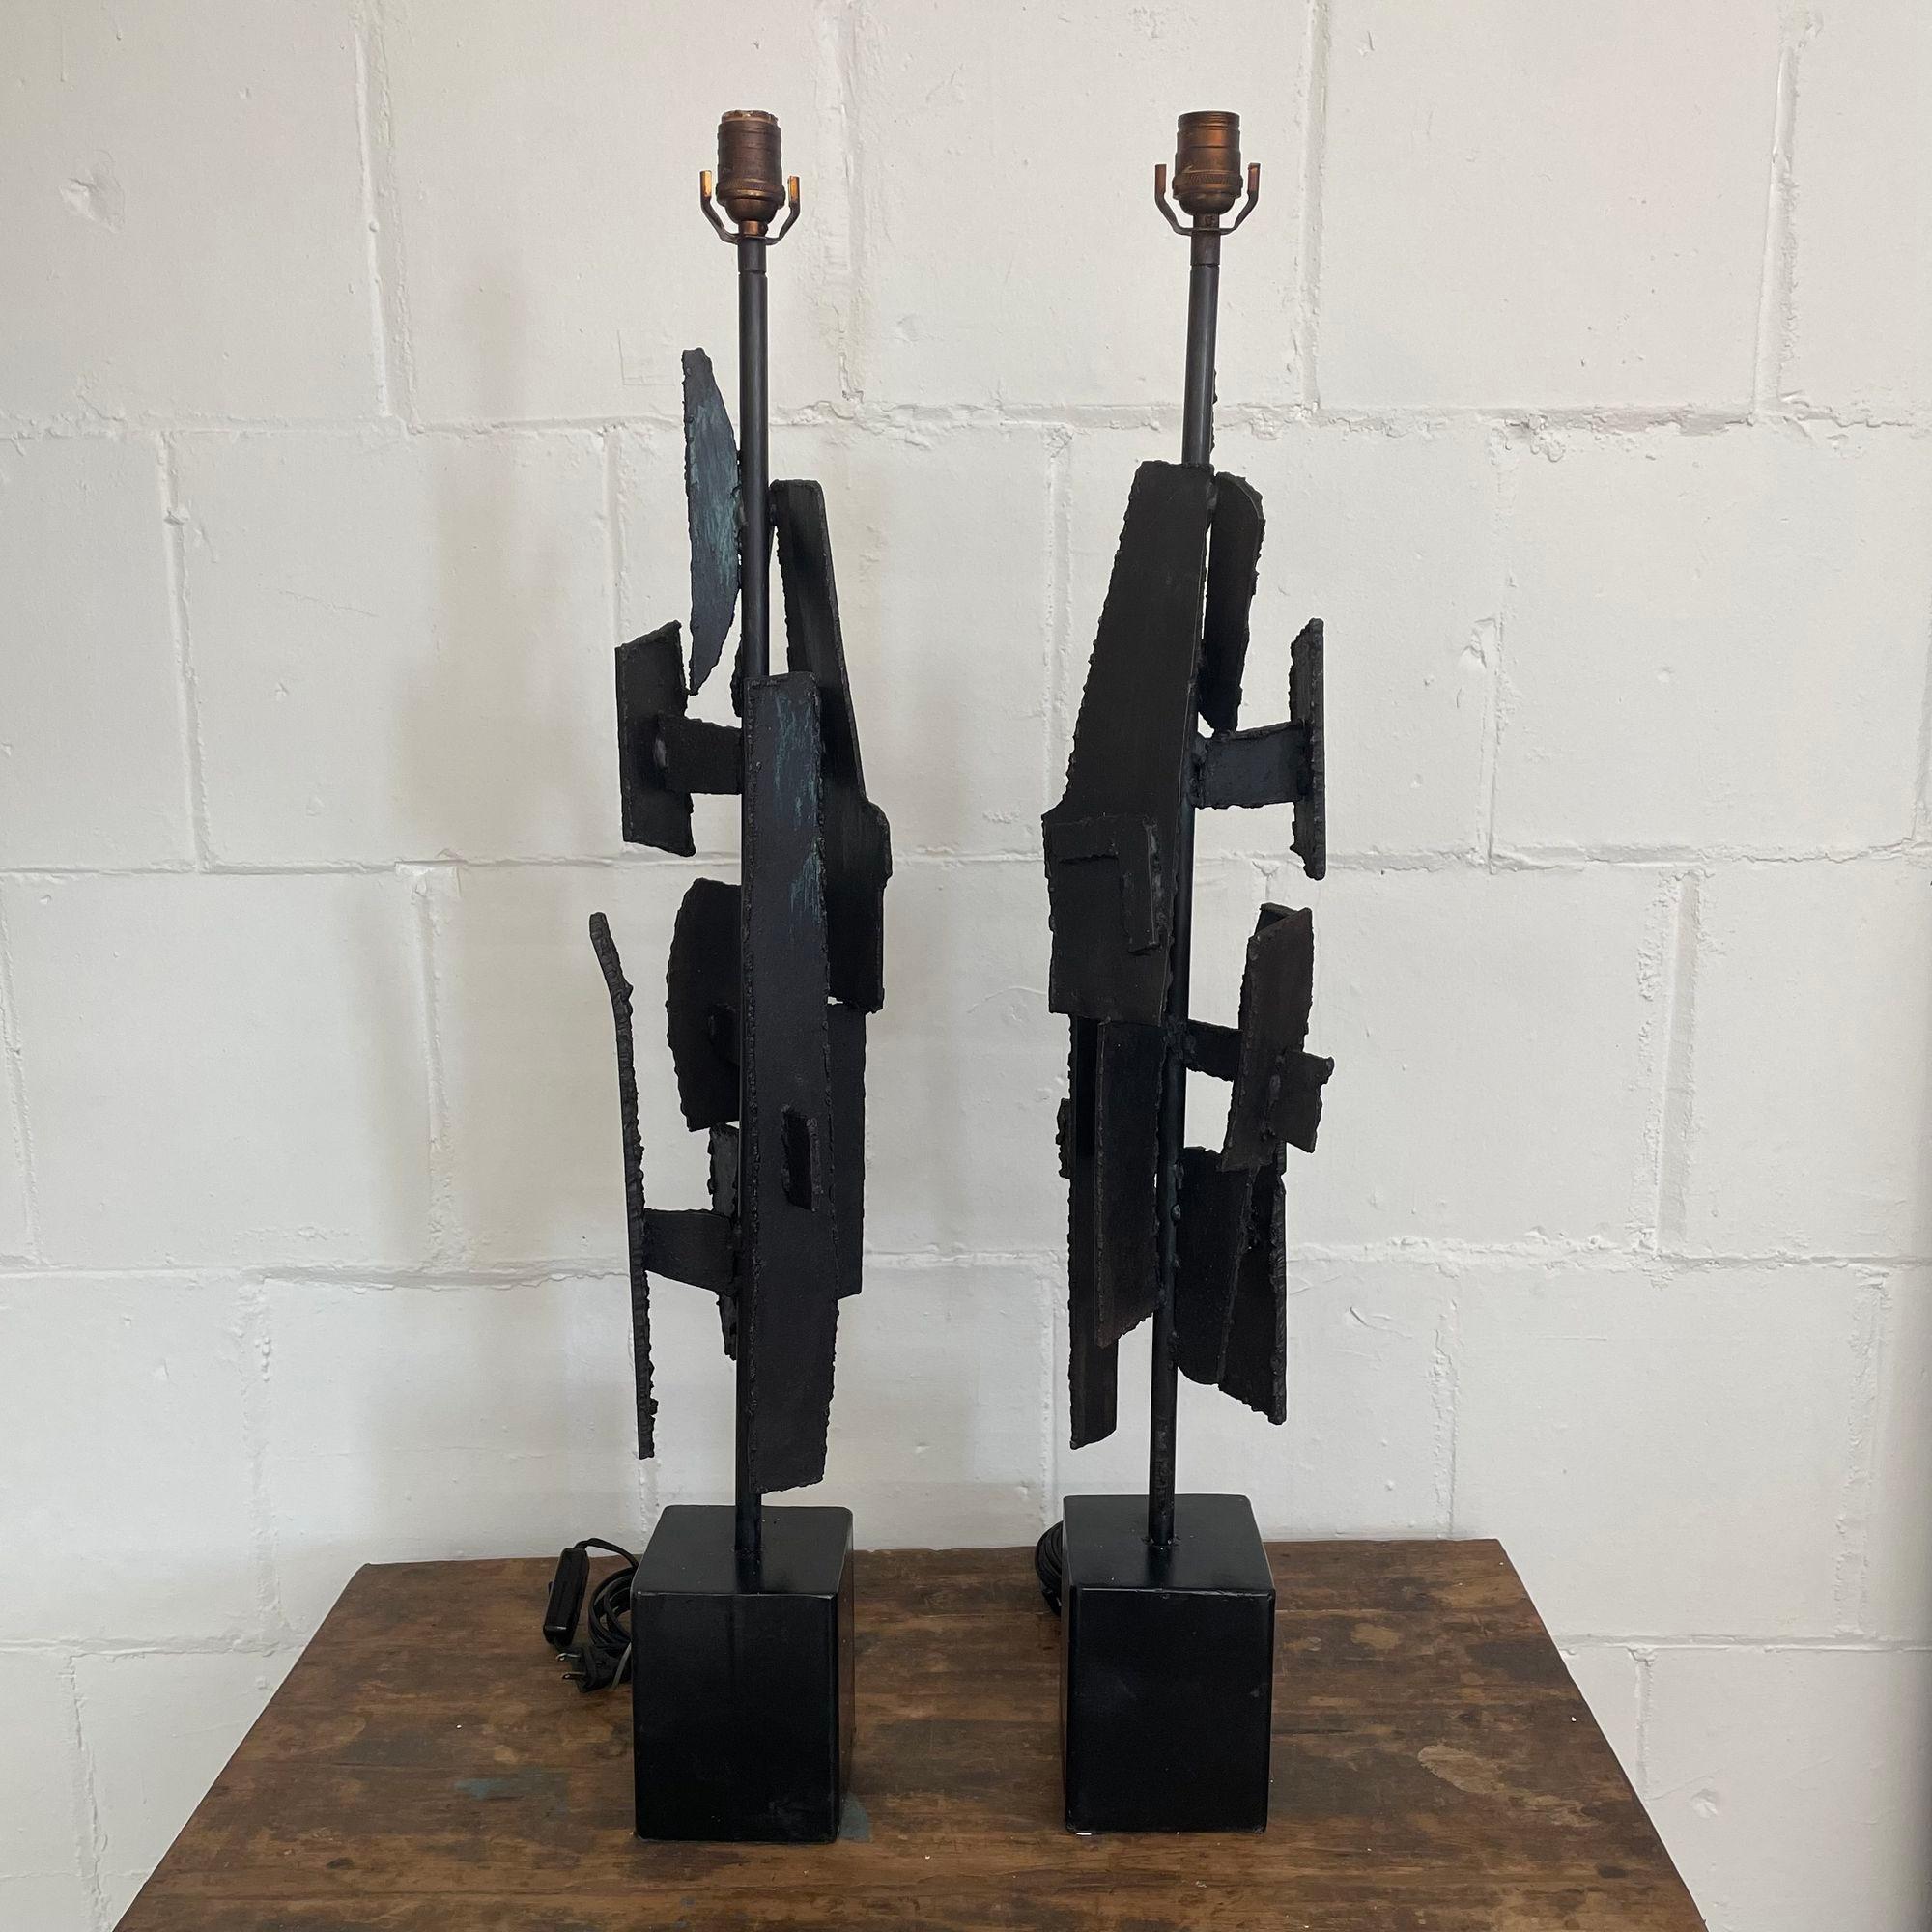 Pair of Hand Welded Wrought Iron Brutalist Style Mid-Century Modern Table Lamps

About Pair of Laurel modernist brutalist blackened steel lamps. In the manner of Paul Evans or Adrian Pearsall. Each lamp takes one light bulb.

Steel, Wrought